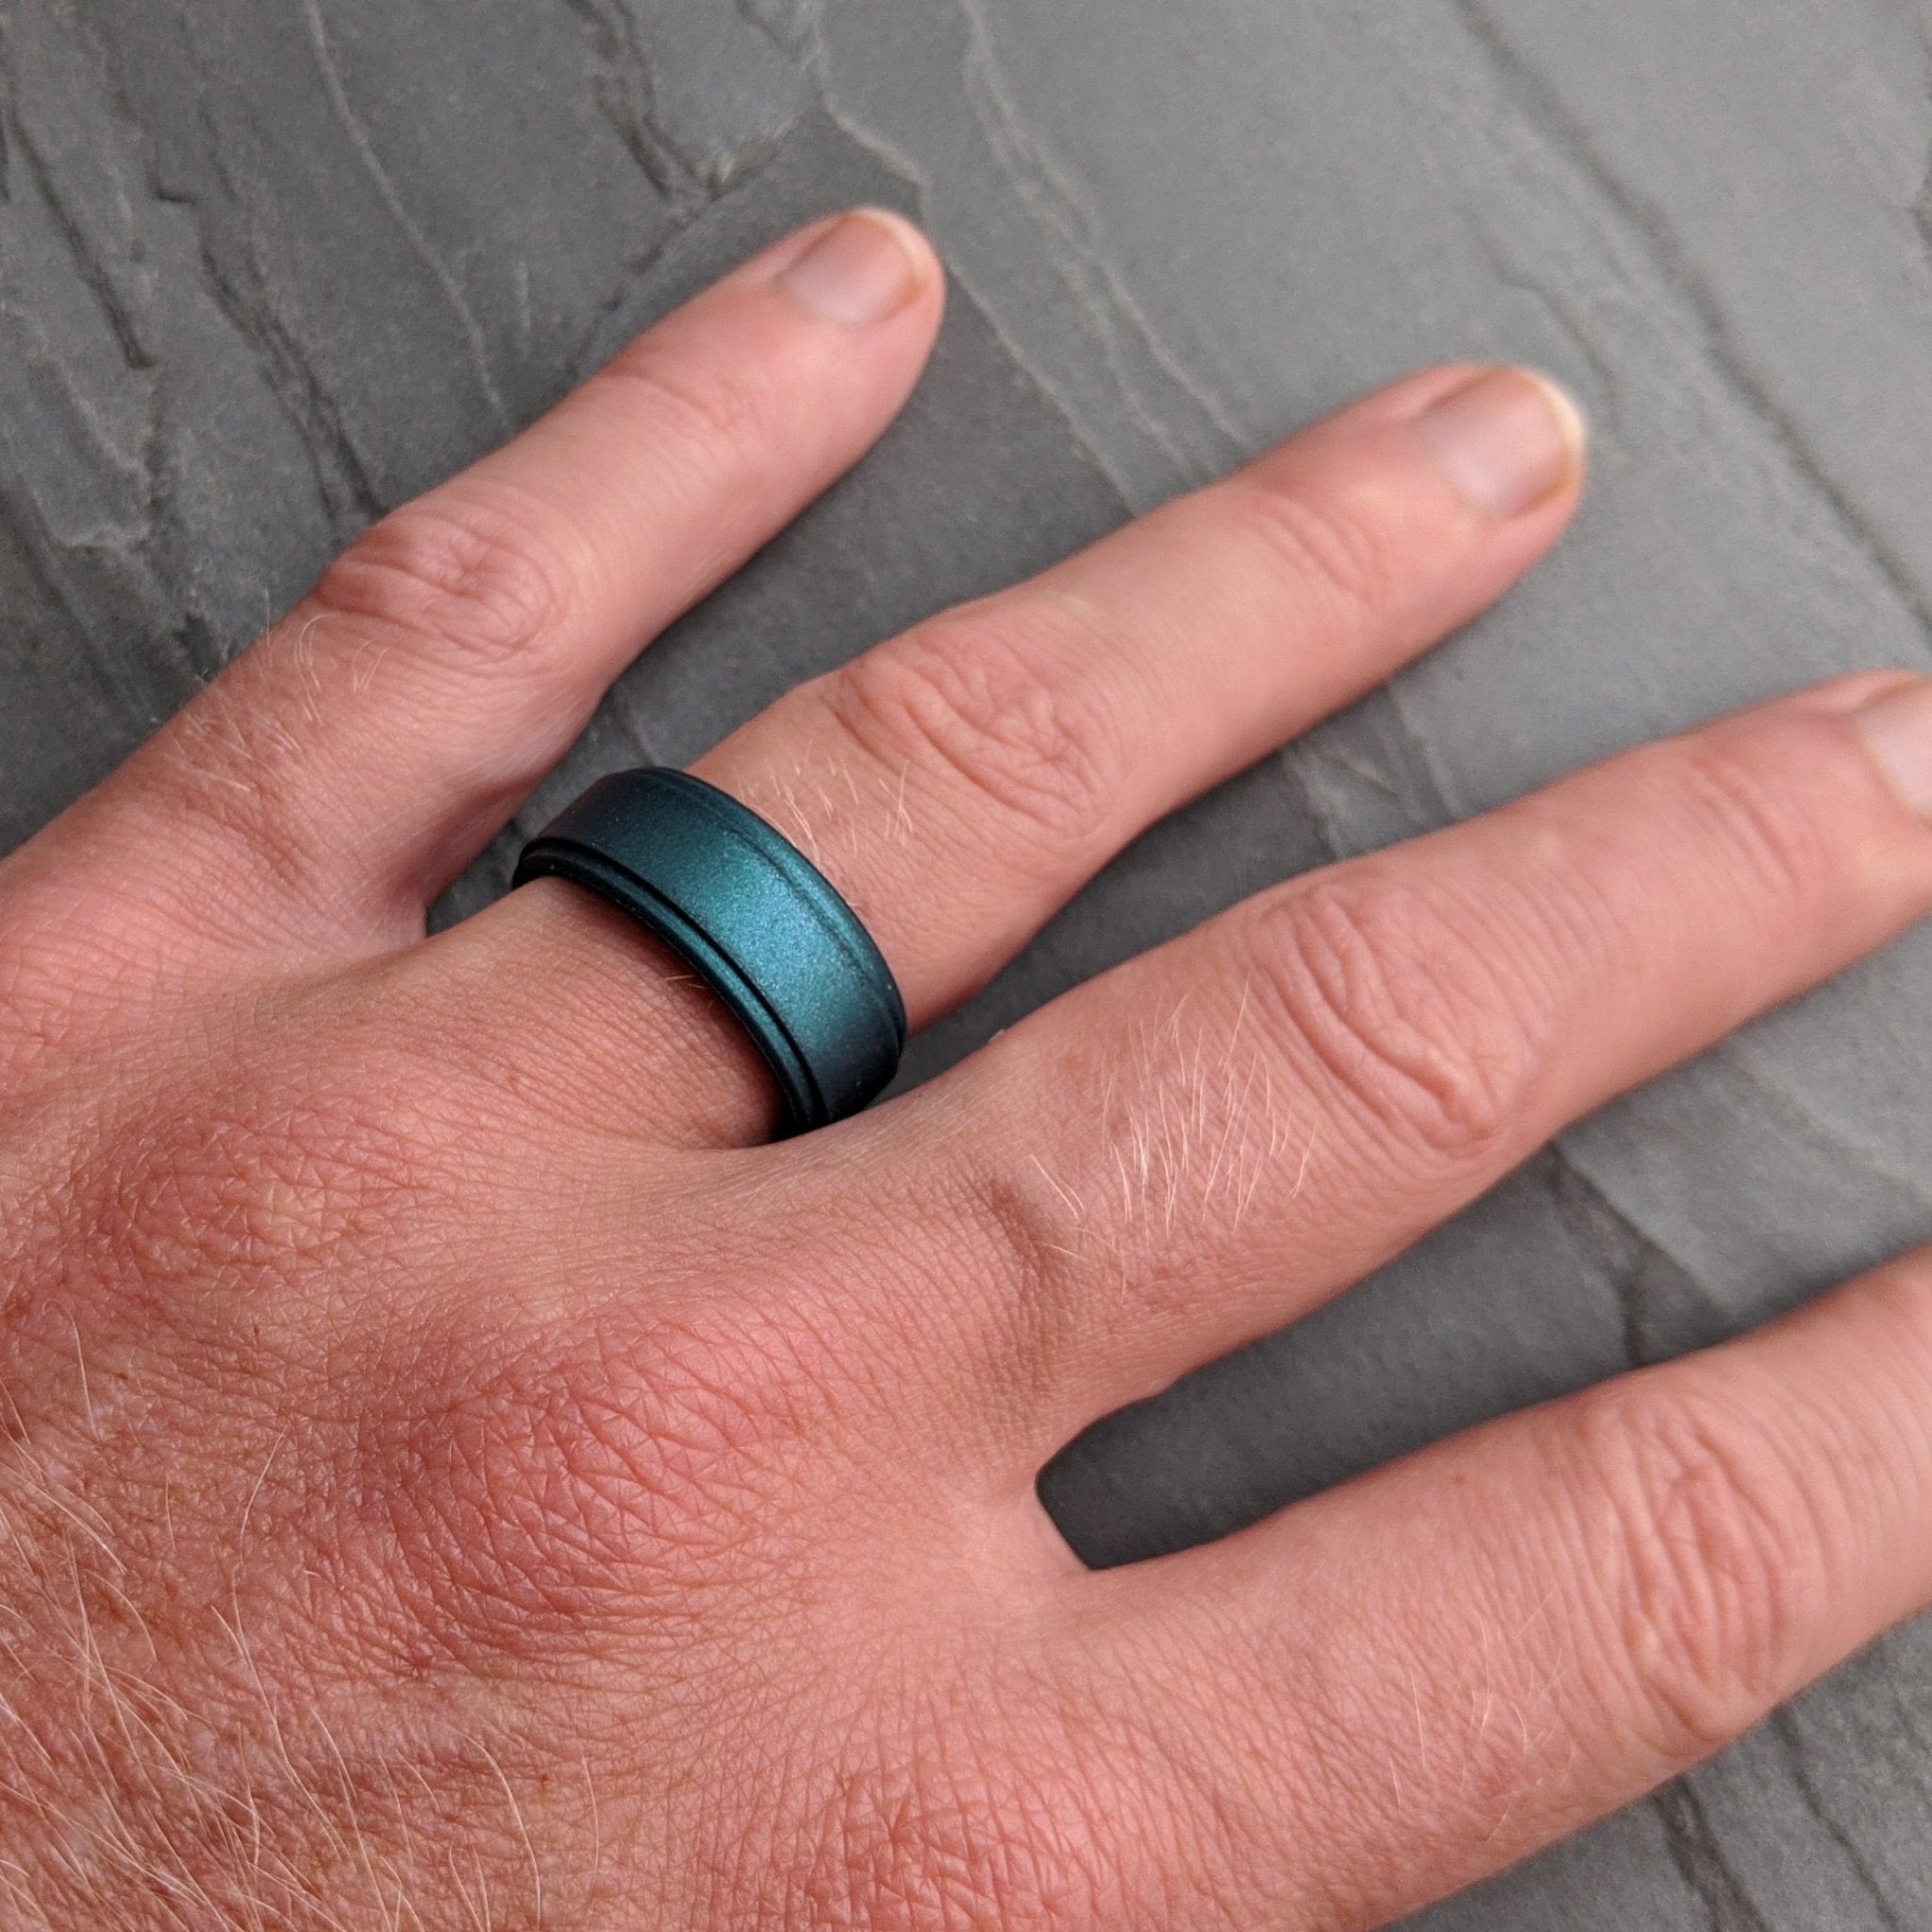 Metal Teal Step Edge Breathable Silicone Ring for Men - Knot Theory